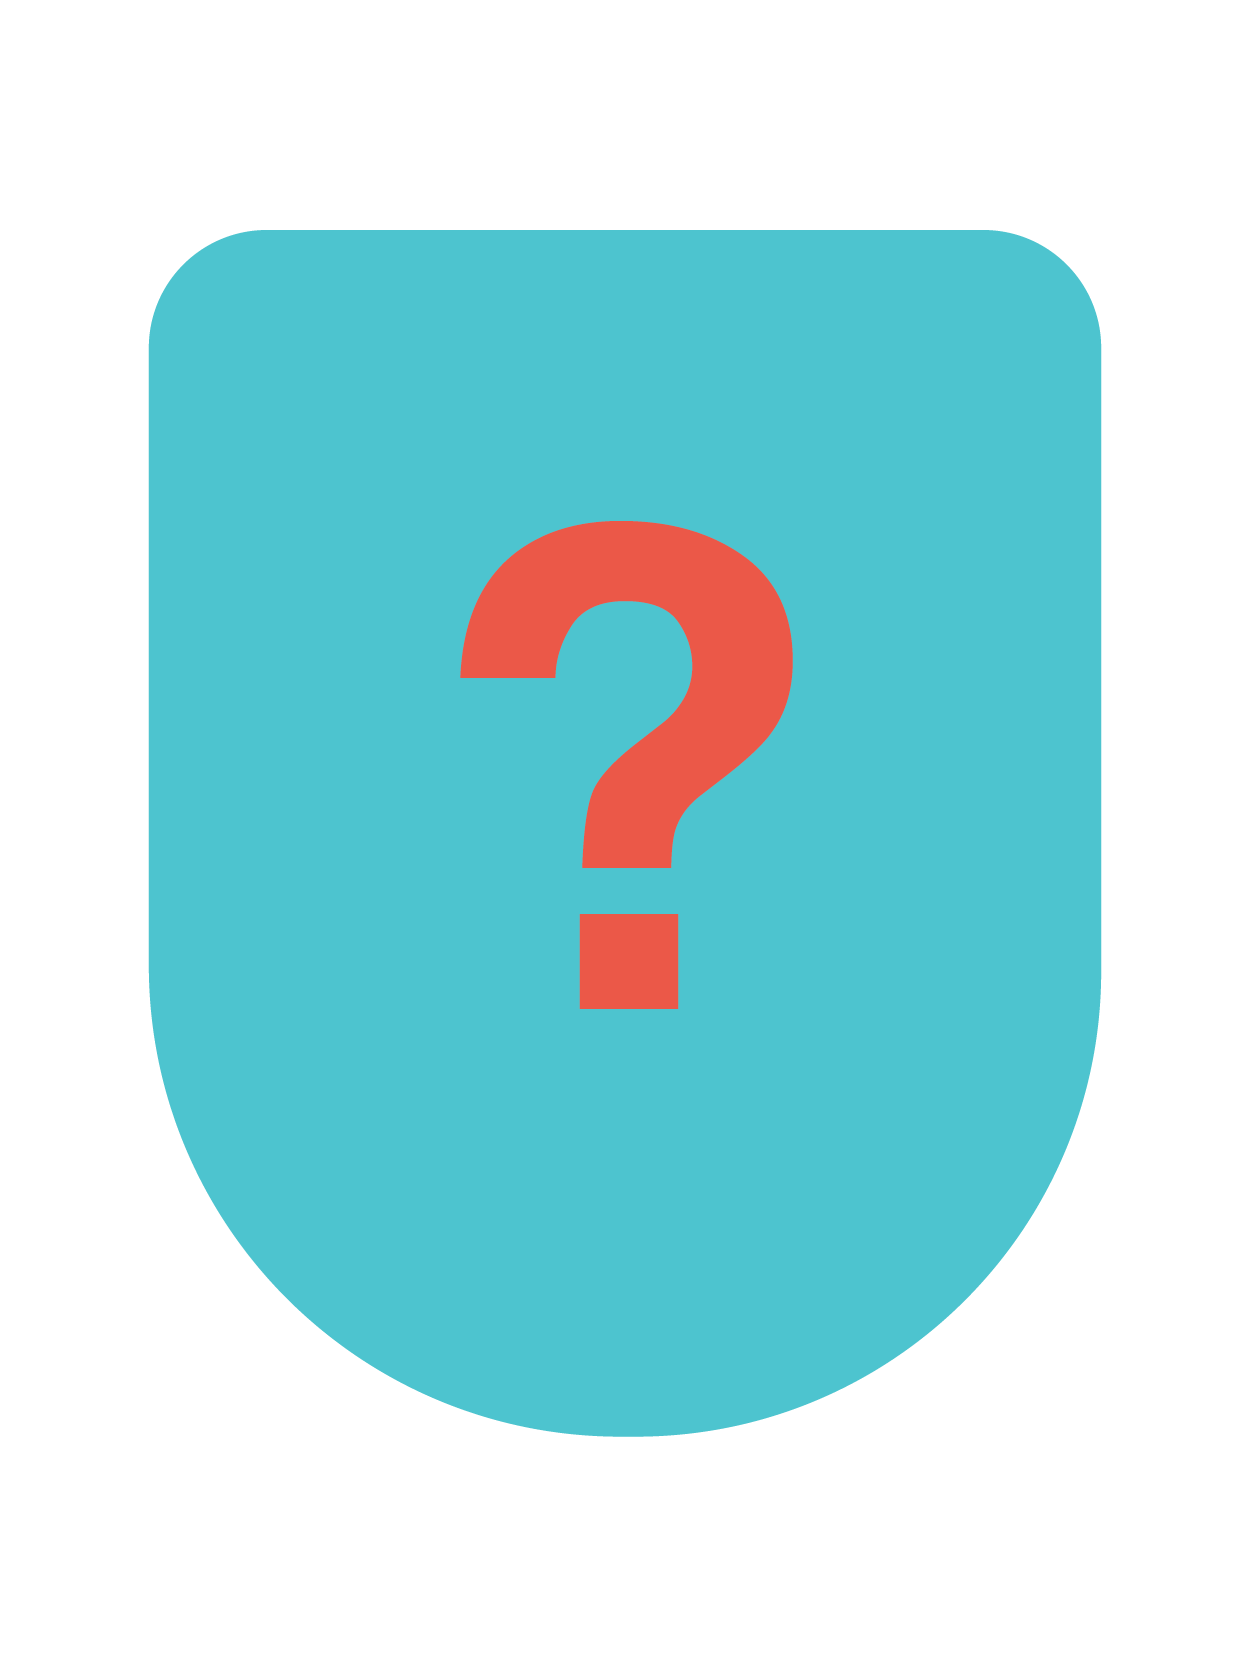 Product roadmap step 3 (red question mark on top of a pod shaped teal coloured background)